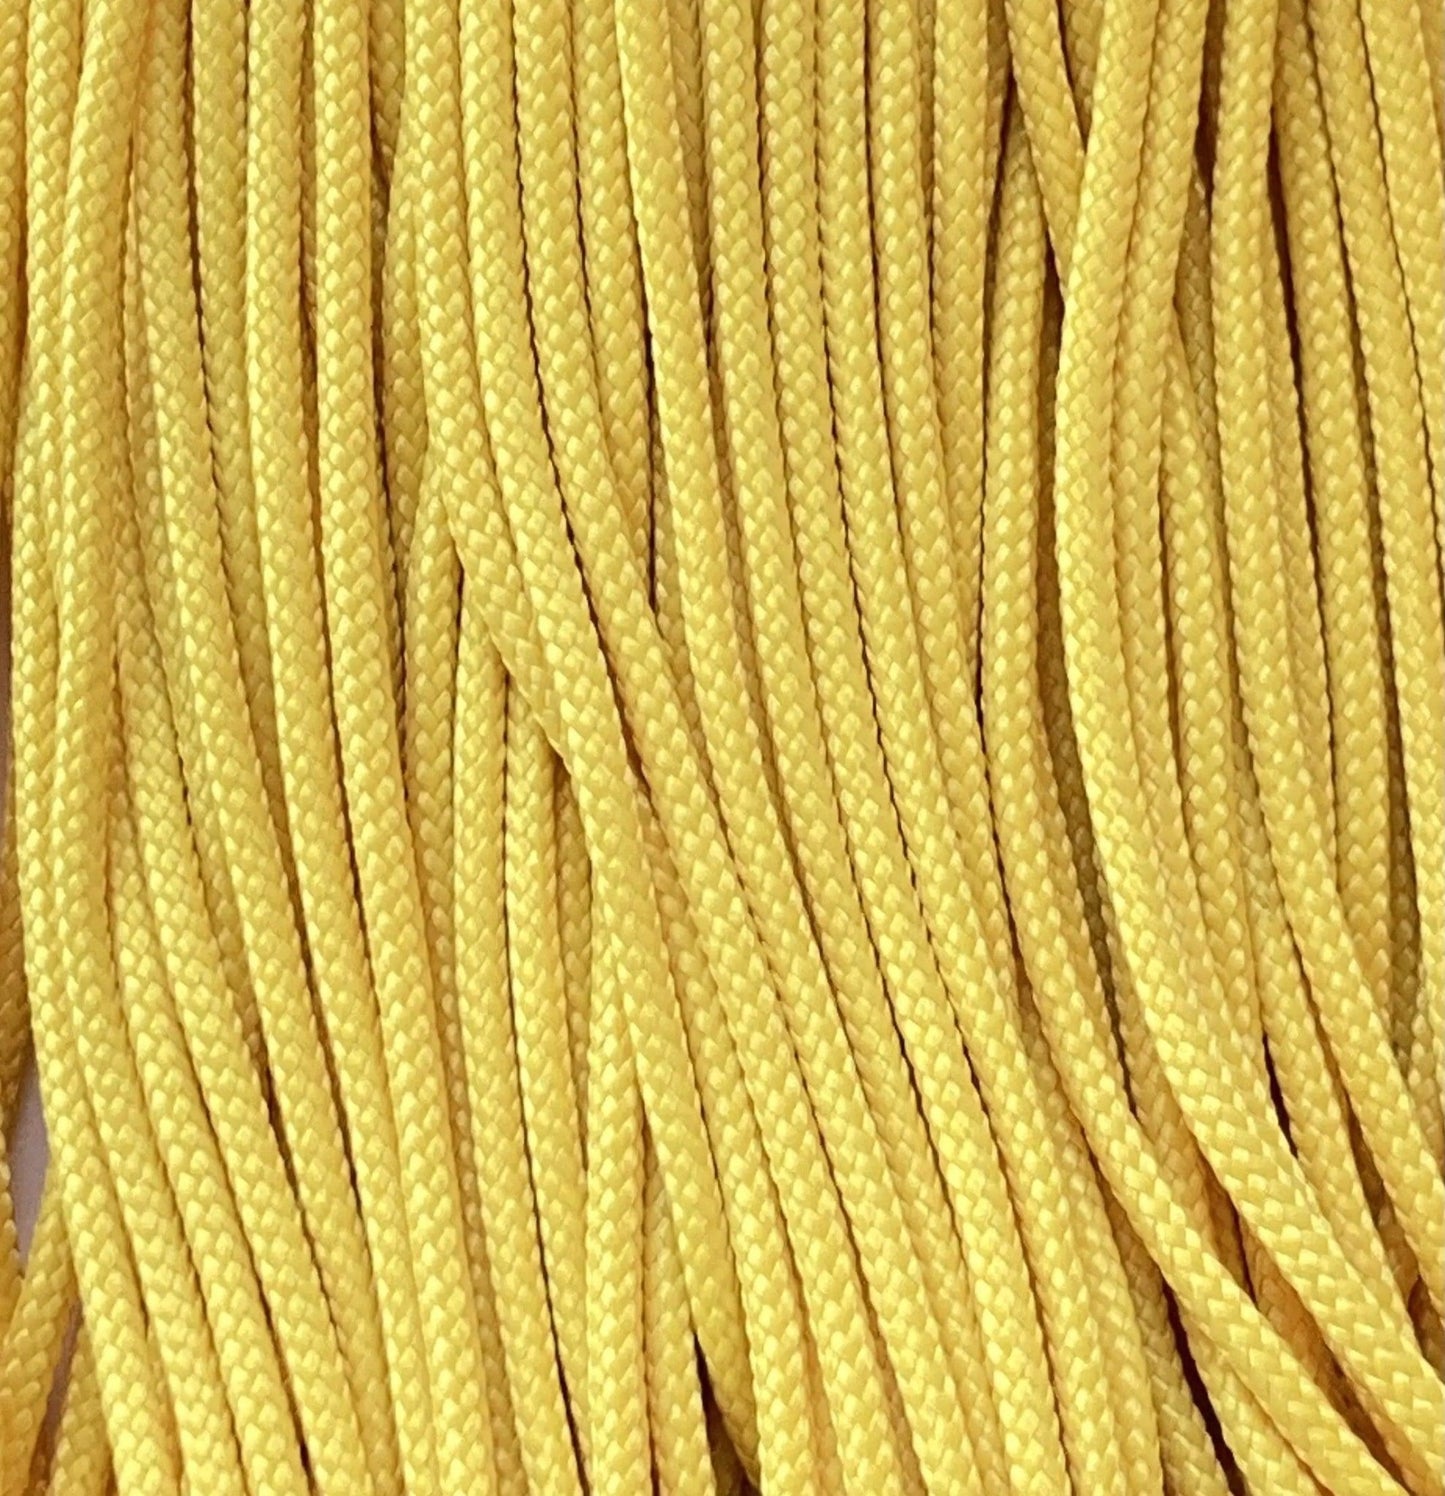 95 Paracord Type 1 FS Yellow Made in the USA Nylon/Nylon(100 FT.) - Paracord Galaxy